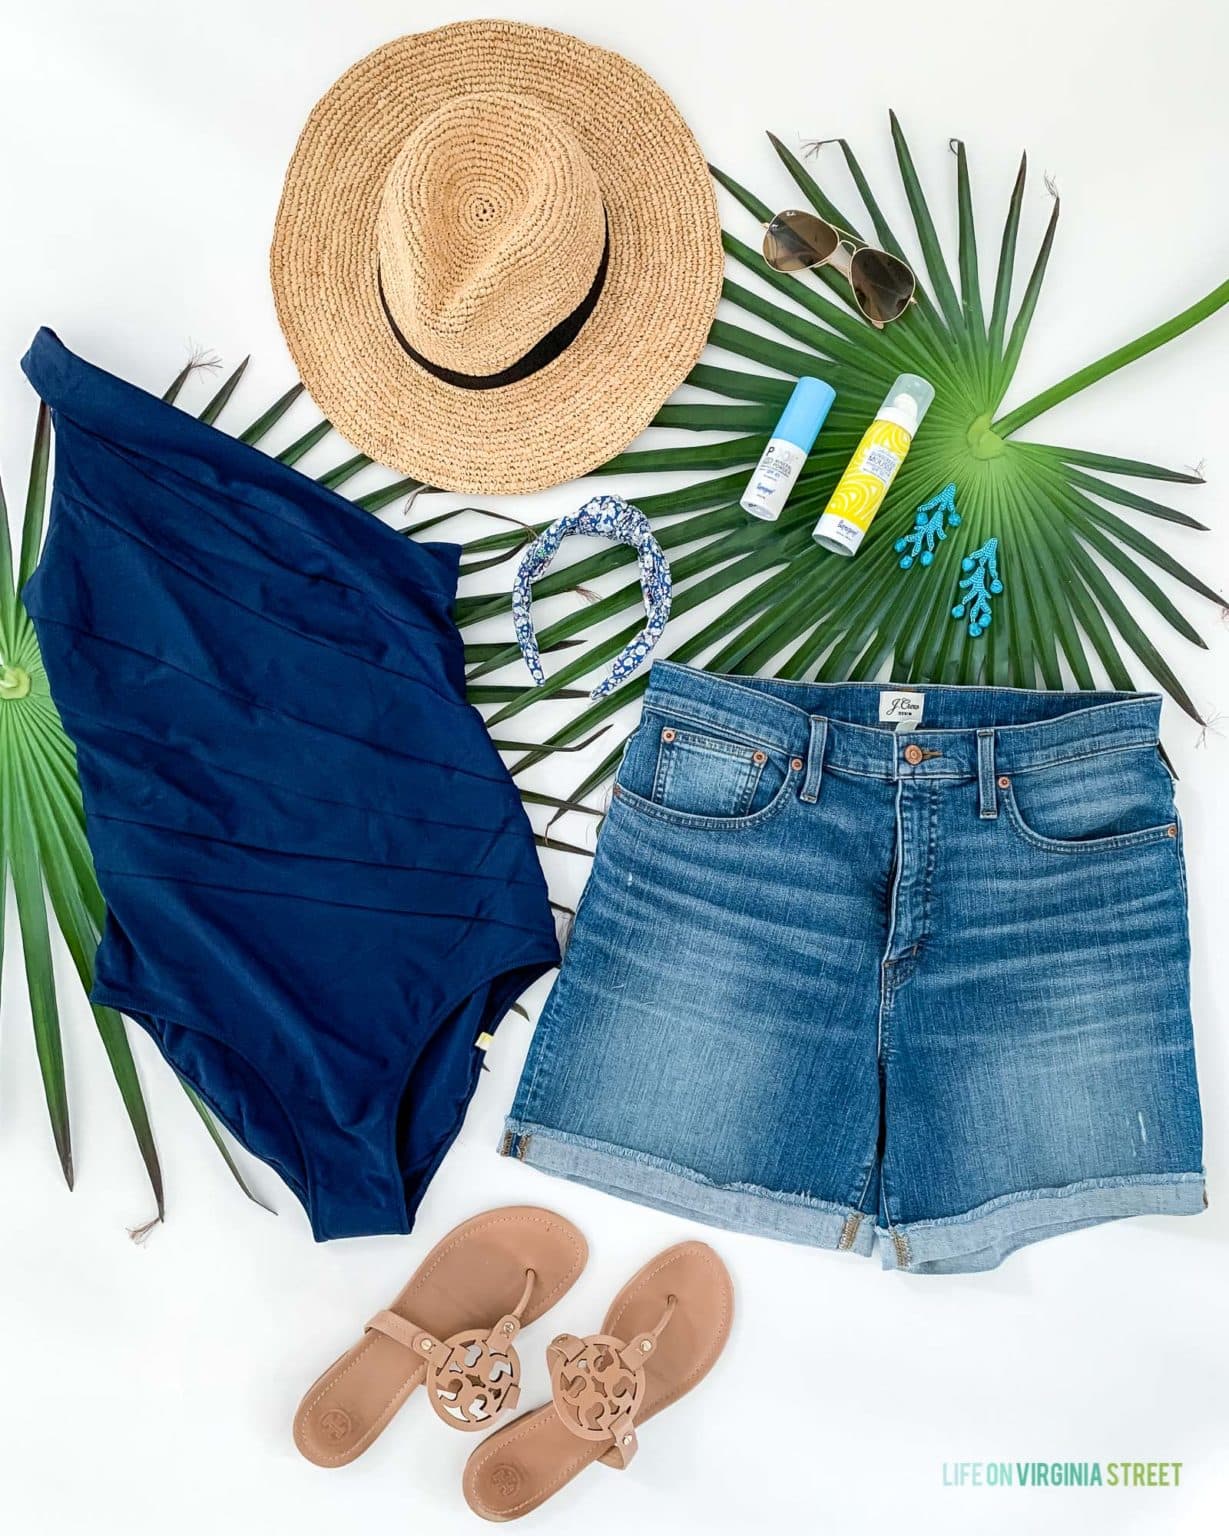 Summer Outfit Ideas & Warm Weather Favorites - Life On Virginia Street